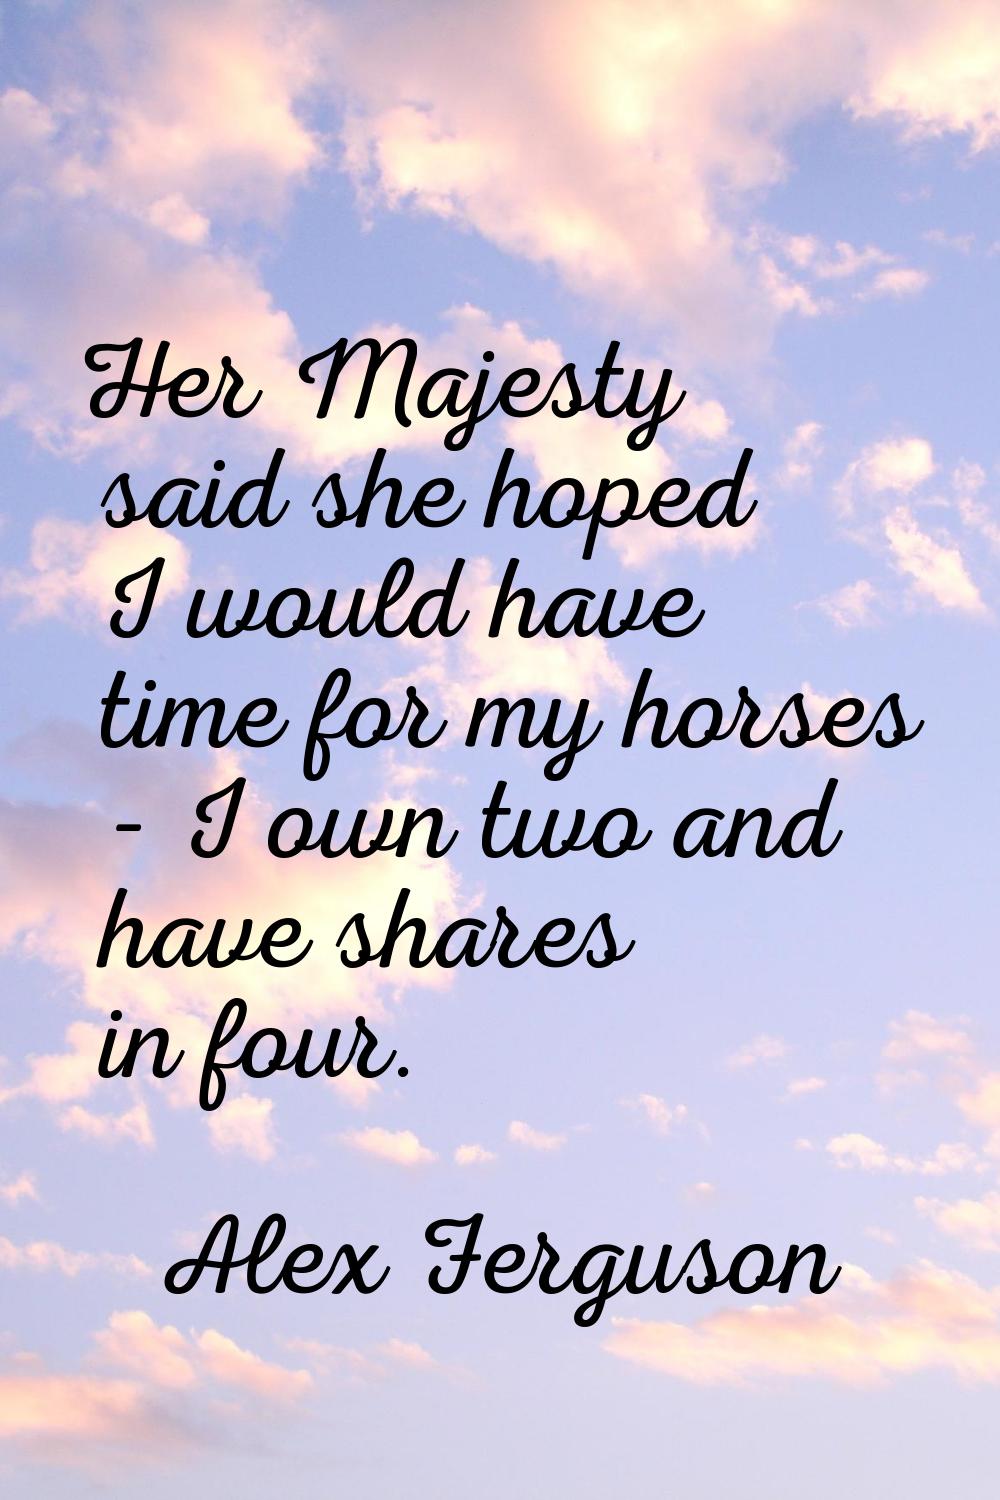 Her Majesty said she hoped I would have time for my horses - I own two and have shares in four.